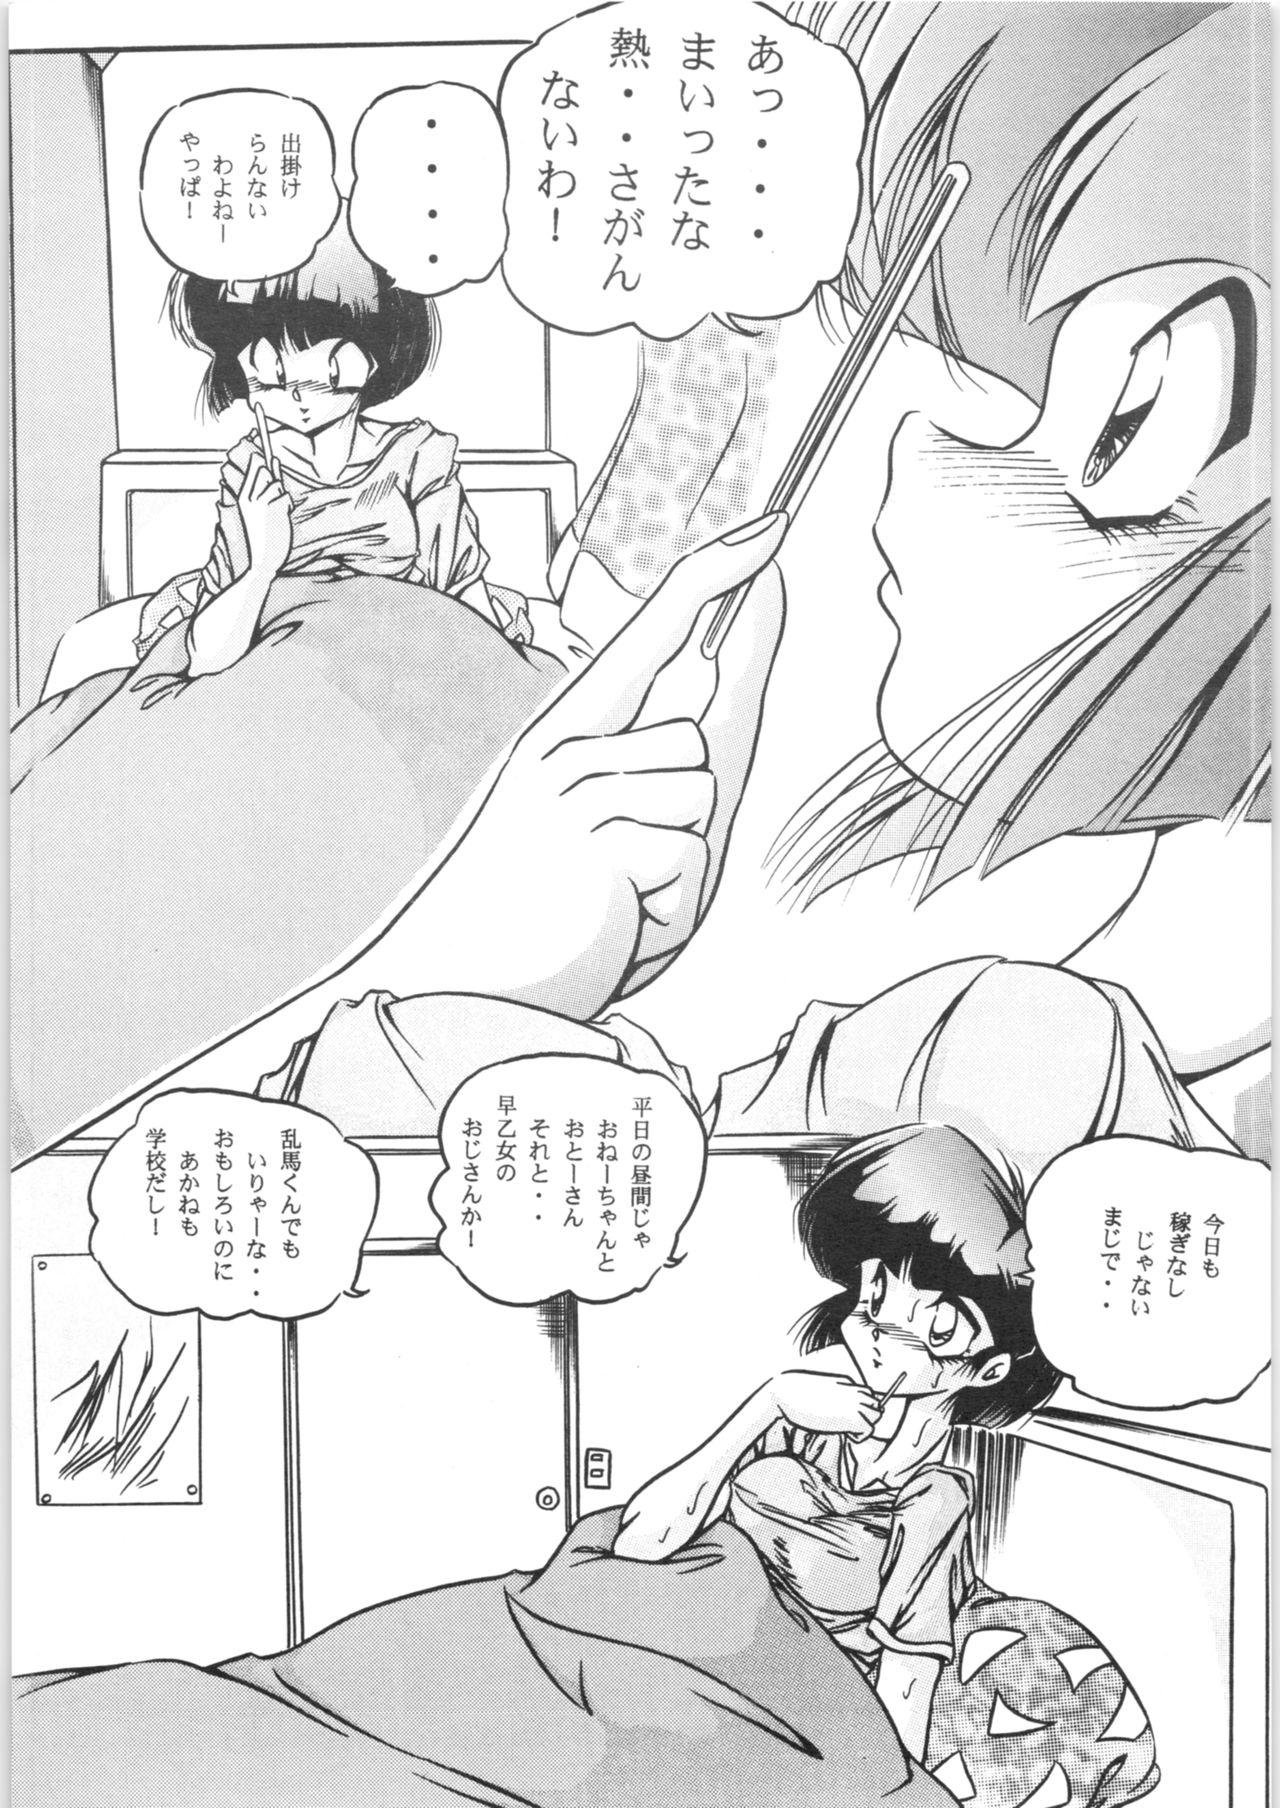 Argentina C-COMPANY SPECIAL STAGE 18 - Ranma 12 Idol project Money Talks - Page 8